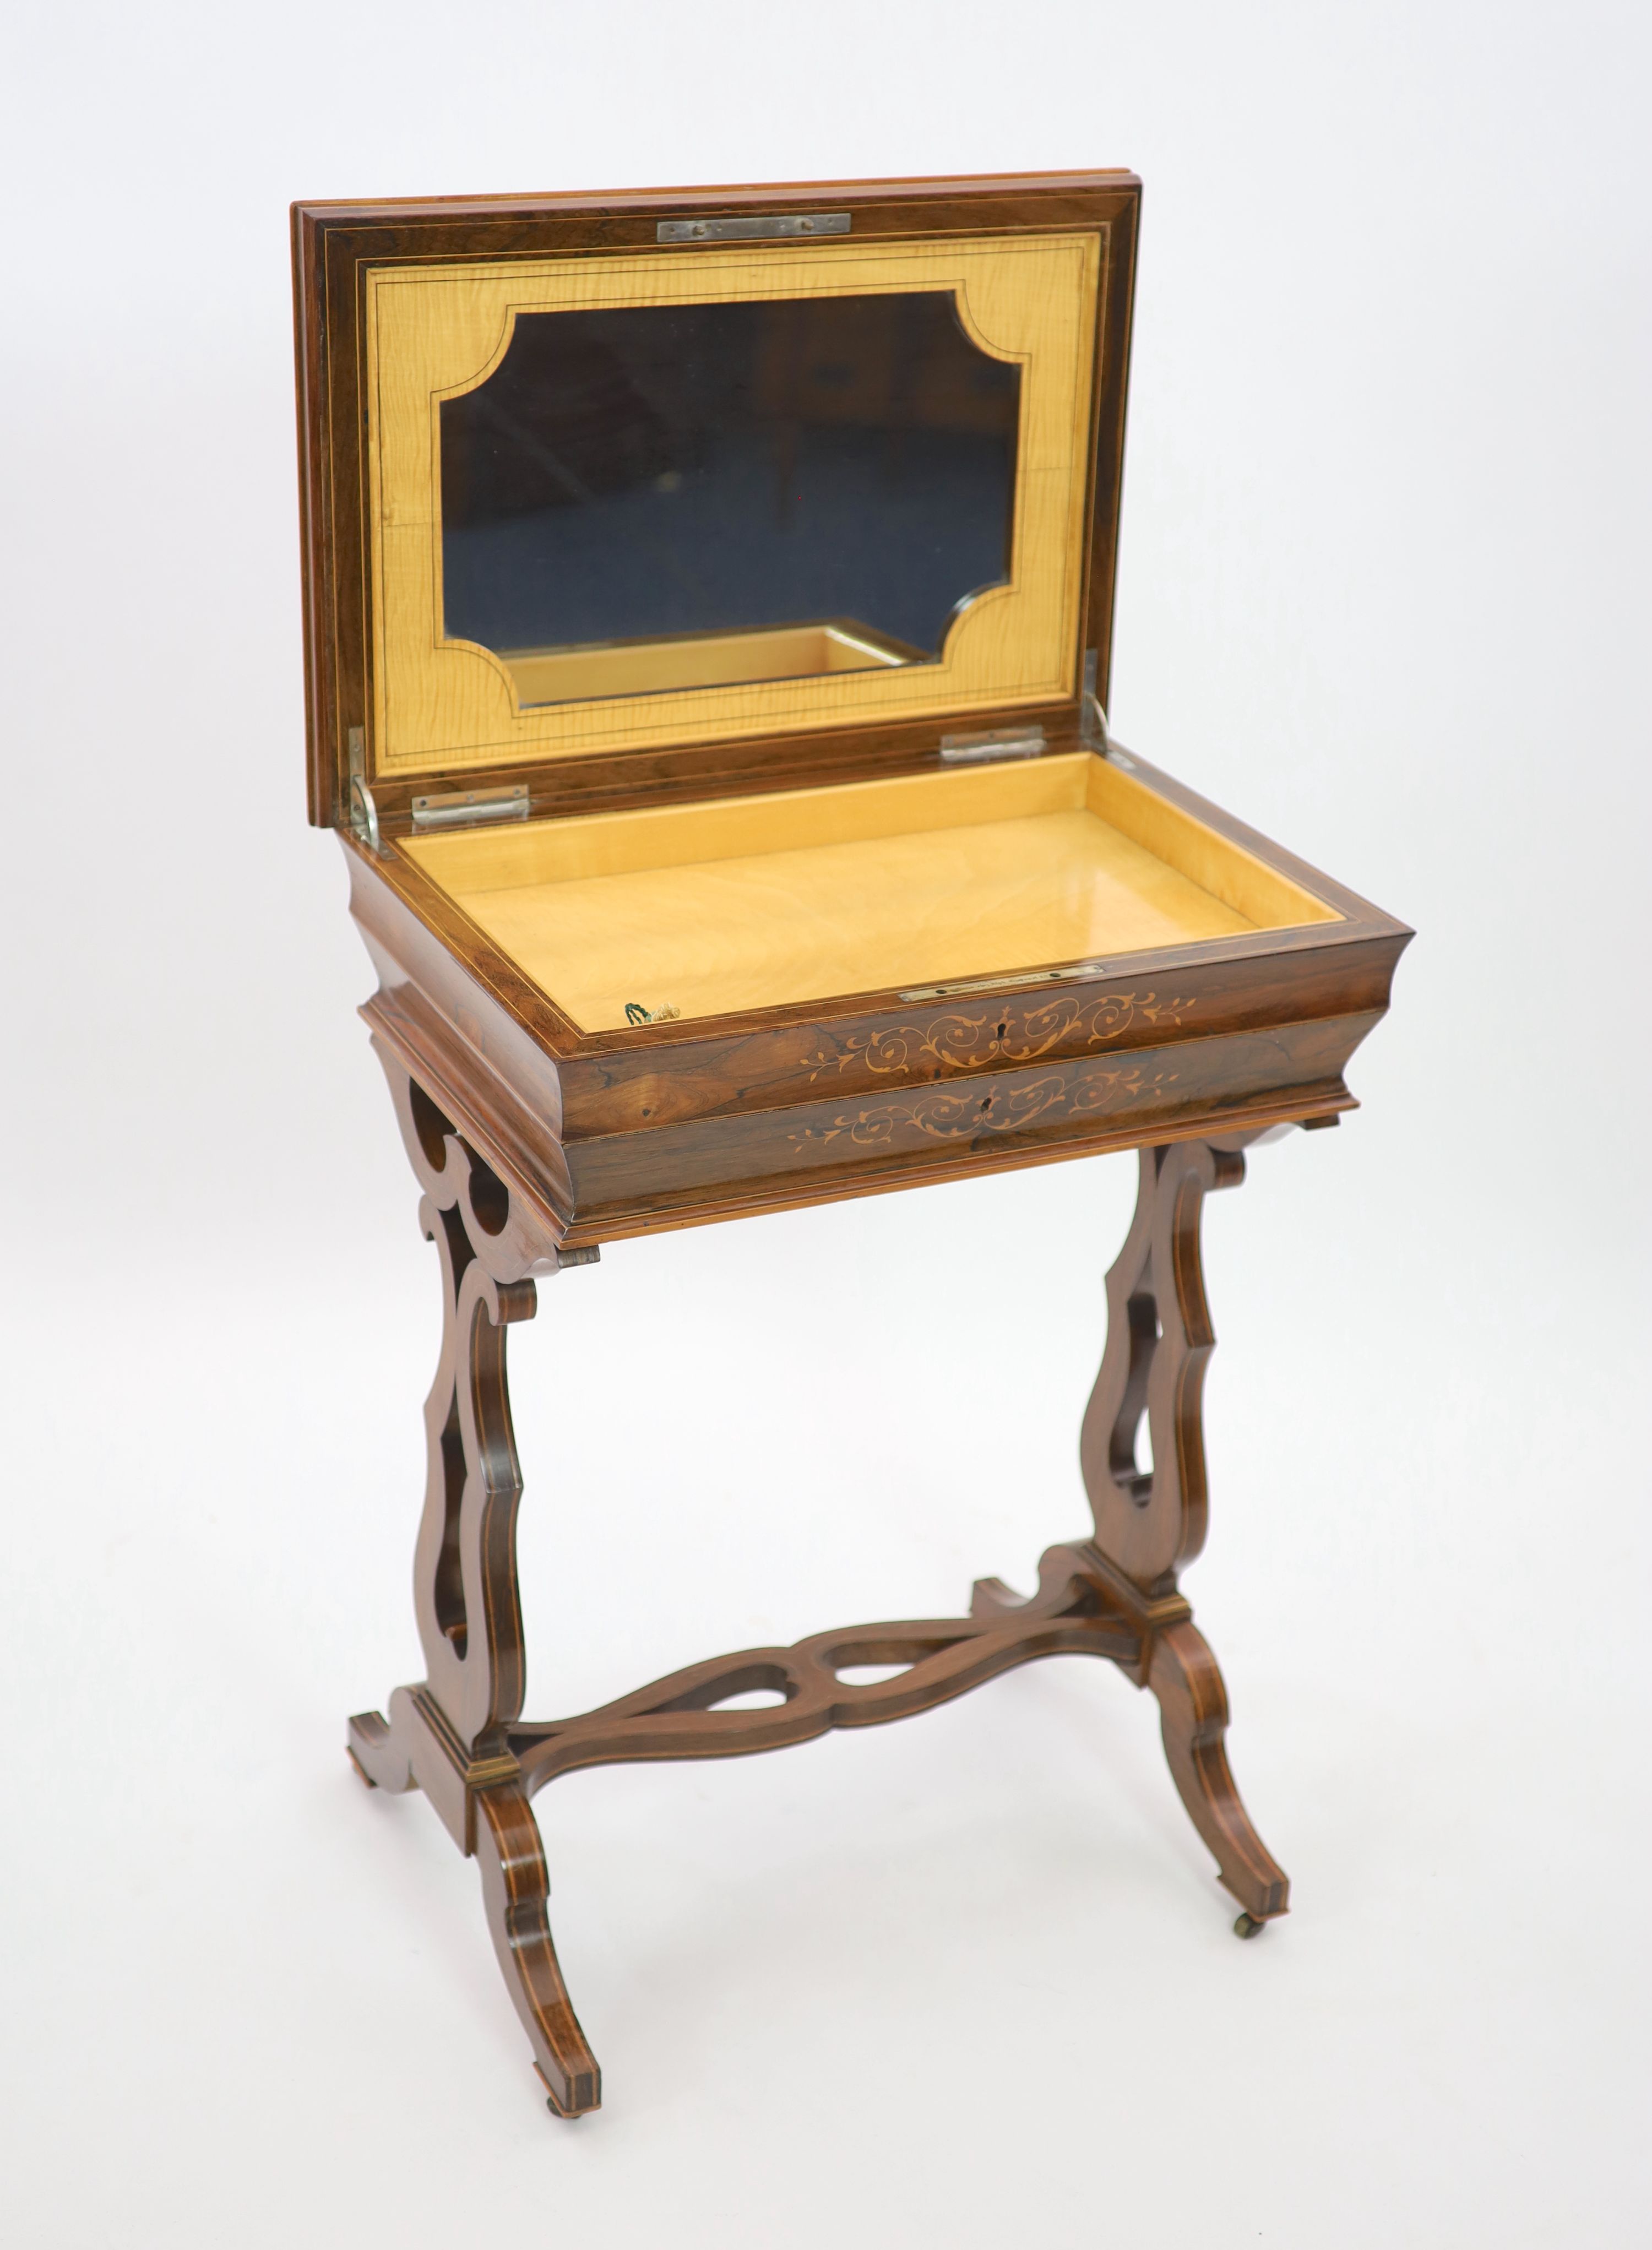 A 19th century French rosewood and sycamore lined lady's dressing table, c.1830, by Alphonse - Image 2 of 6